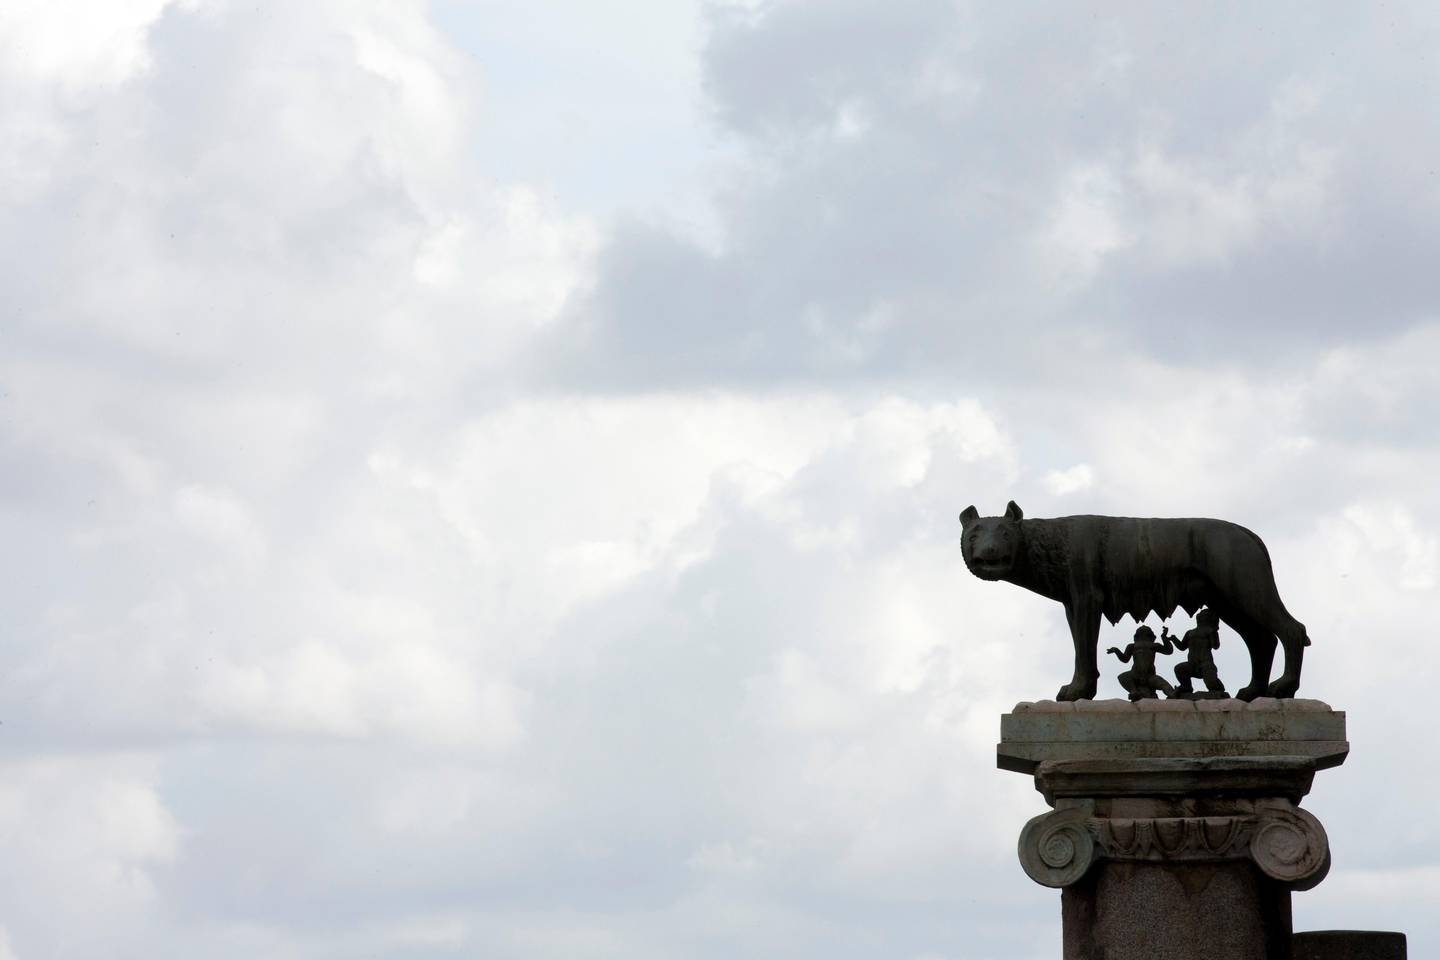 Clouds float over the bronze statue of a she-wolf nursing the infants Romulus and Remus, symbol of Rome, outside Rome's Campidoglio Capitol Hill, Thursday, Oct. 8, 2015. Rome's embattled mayor, Ignazio Marino, was under mounting pressure Thursday to resign following a scandal over his expense accounts that threatened to be the final straw in a months-long campaign by his opponents to get him out of office. (AP Photo/Alessandra Tarantino)